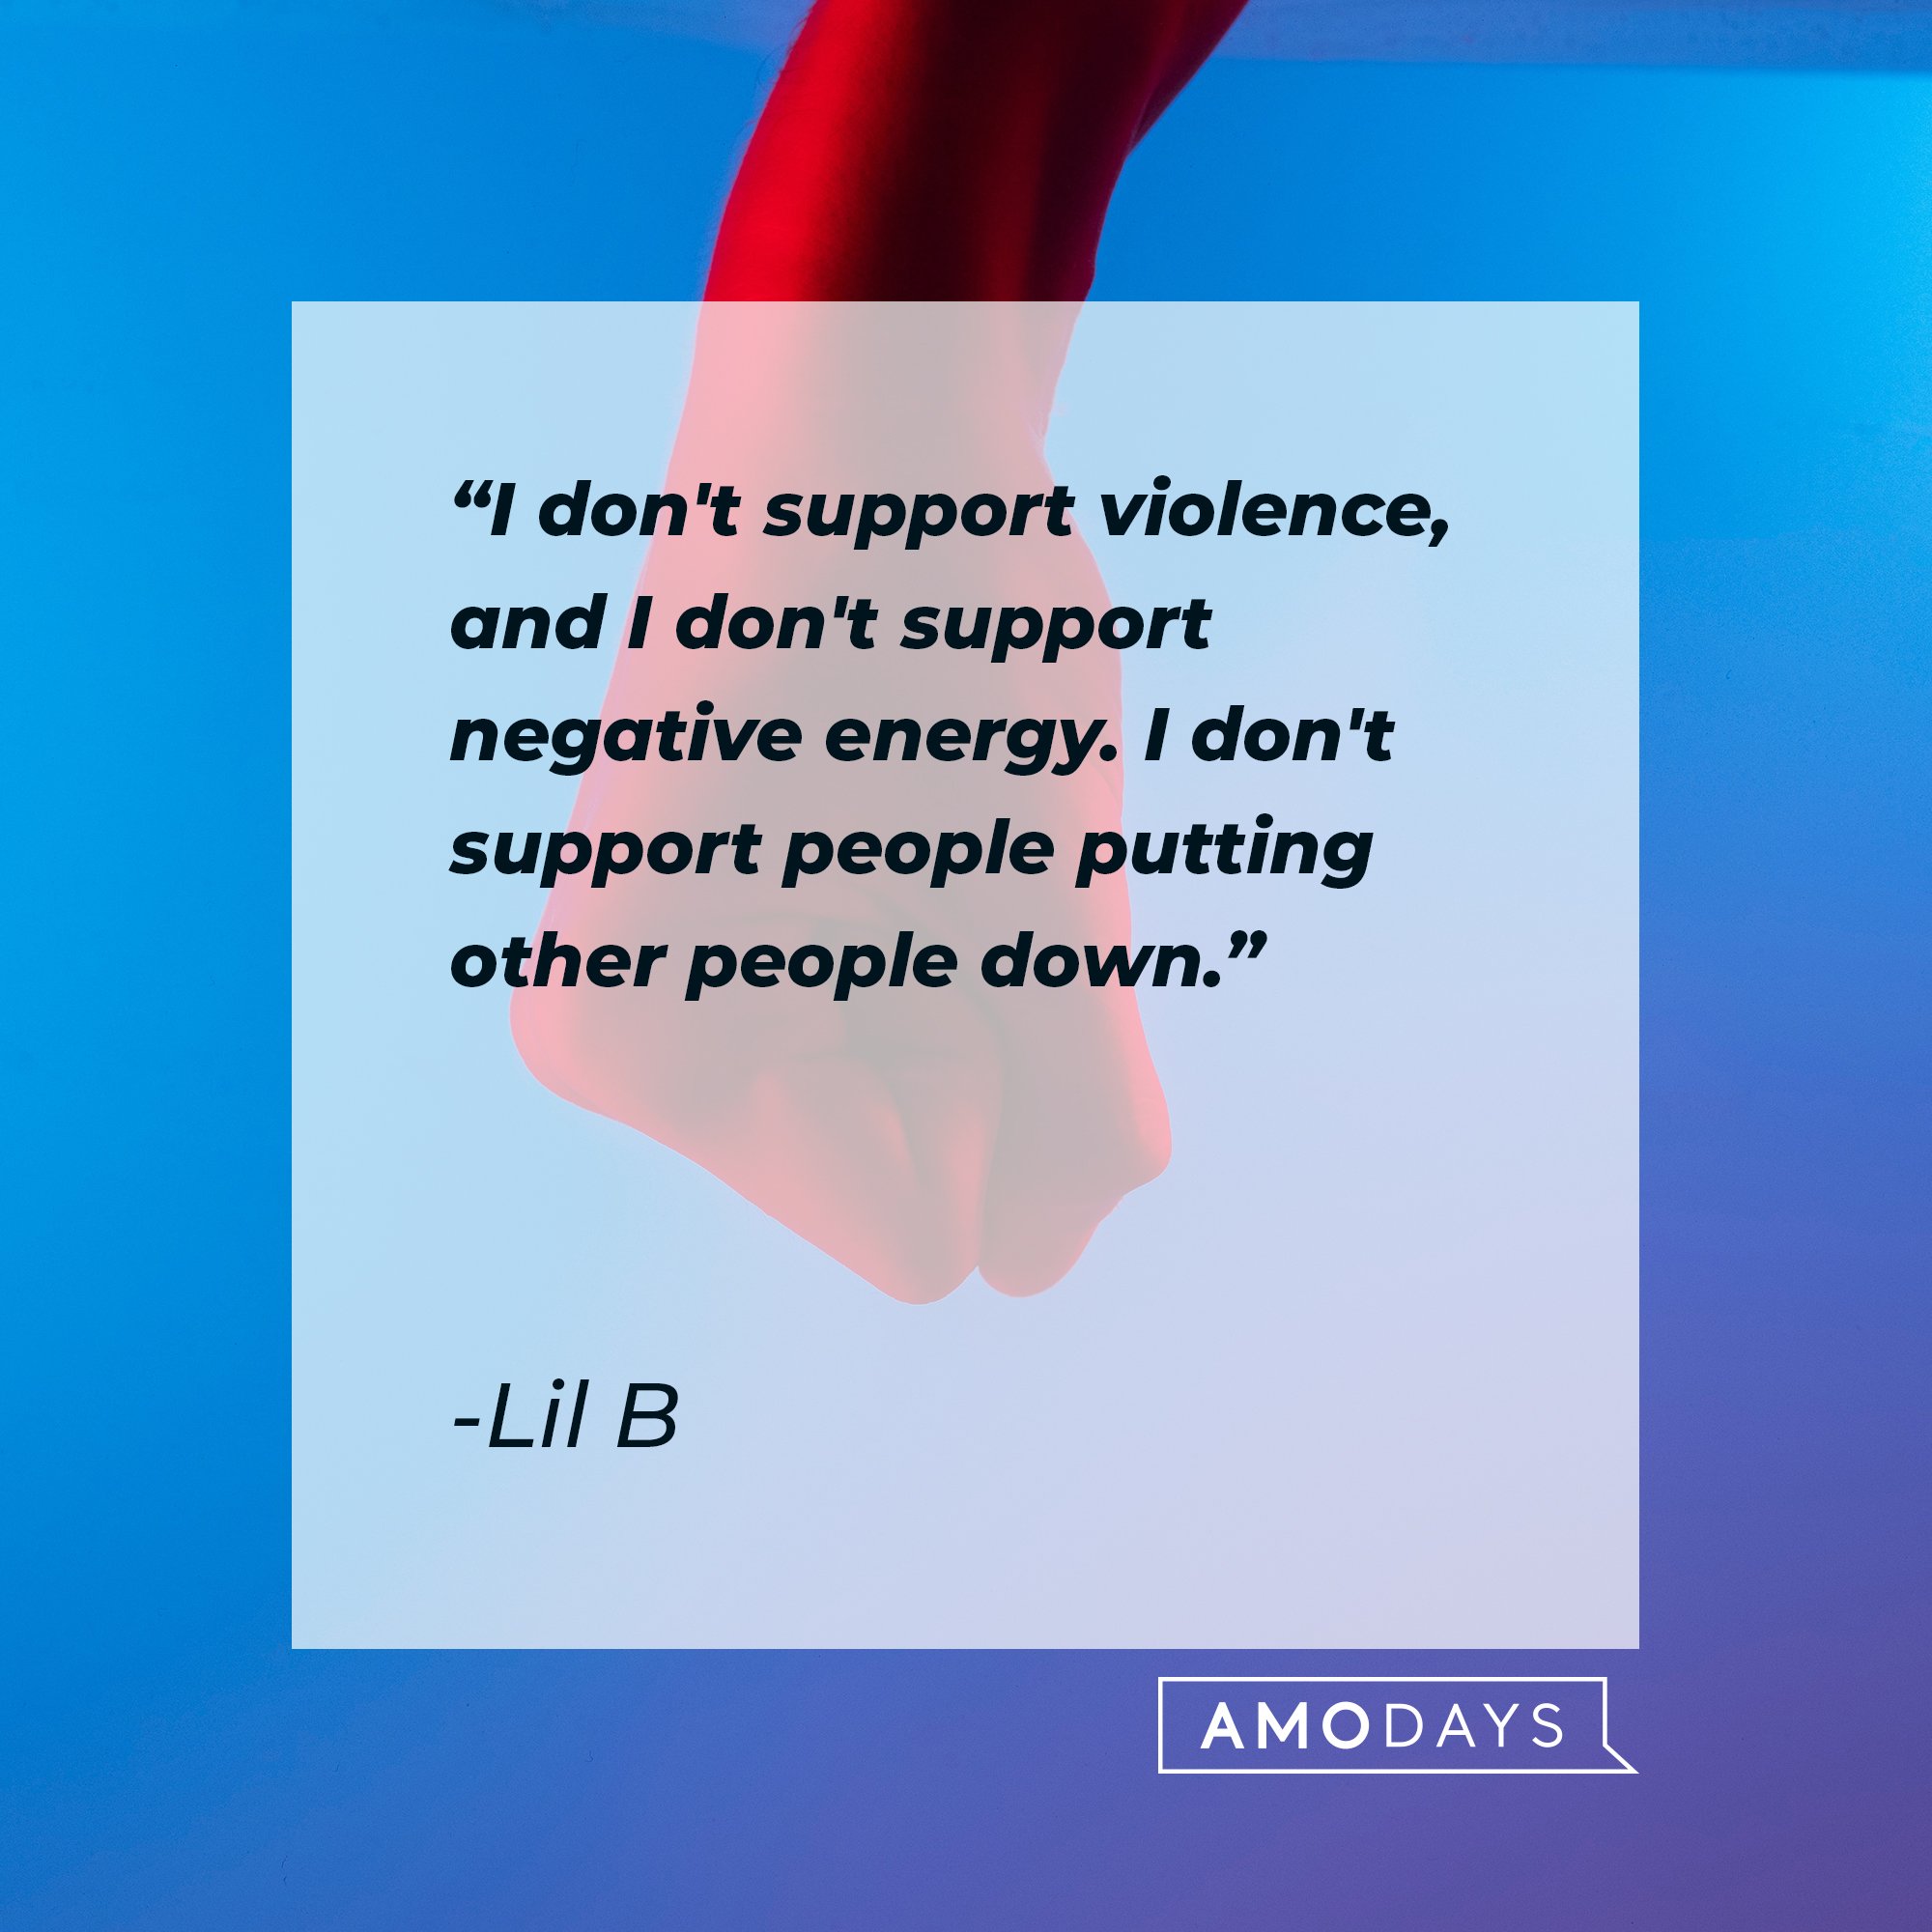 Lil B’s quote: "I don't support violence, and I don't support negative energy. I don't support people putting other people down." | Image: AmoDays 